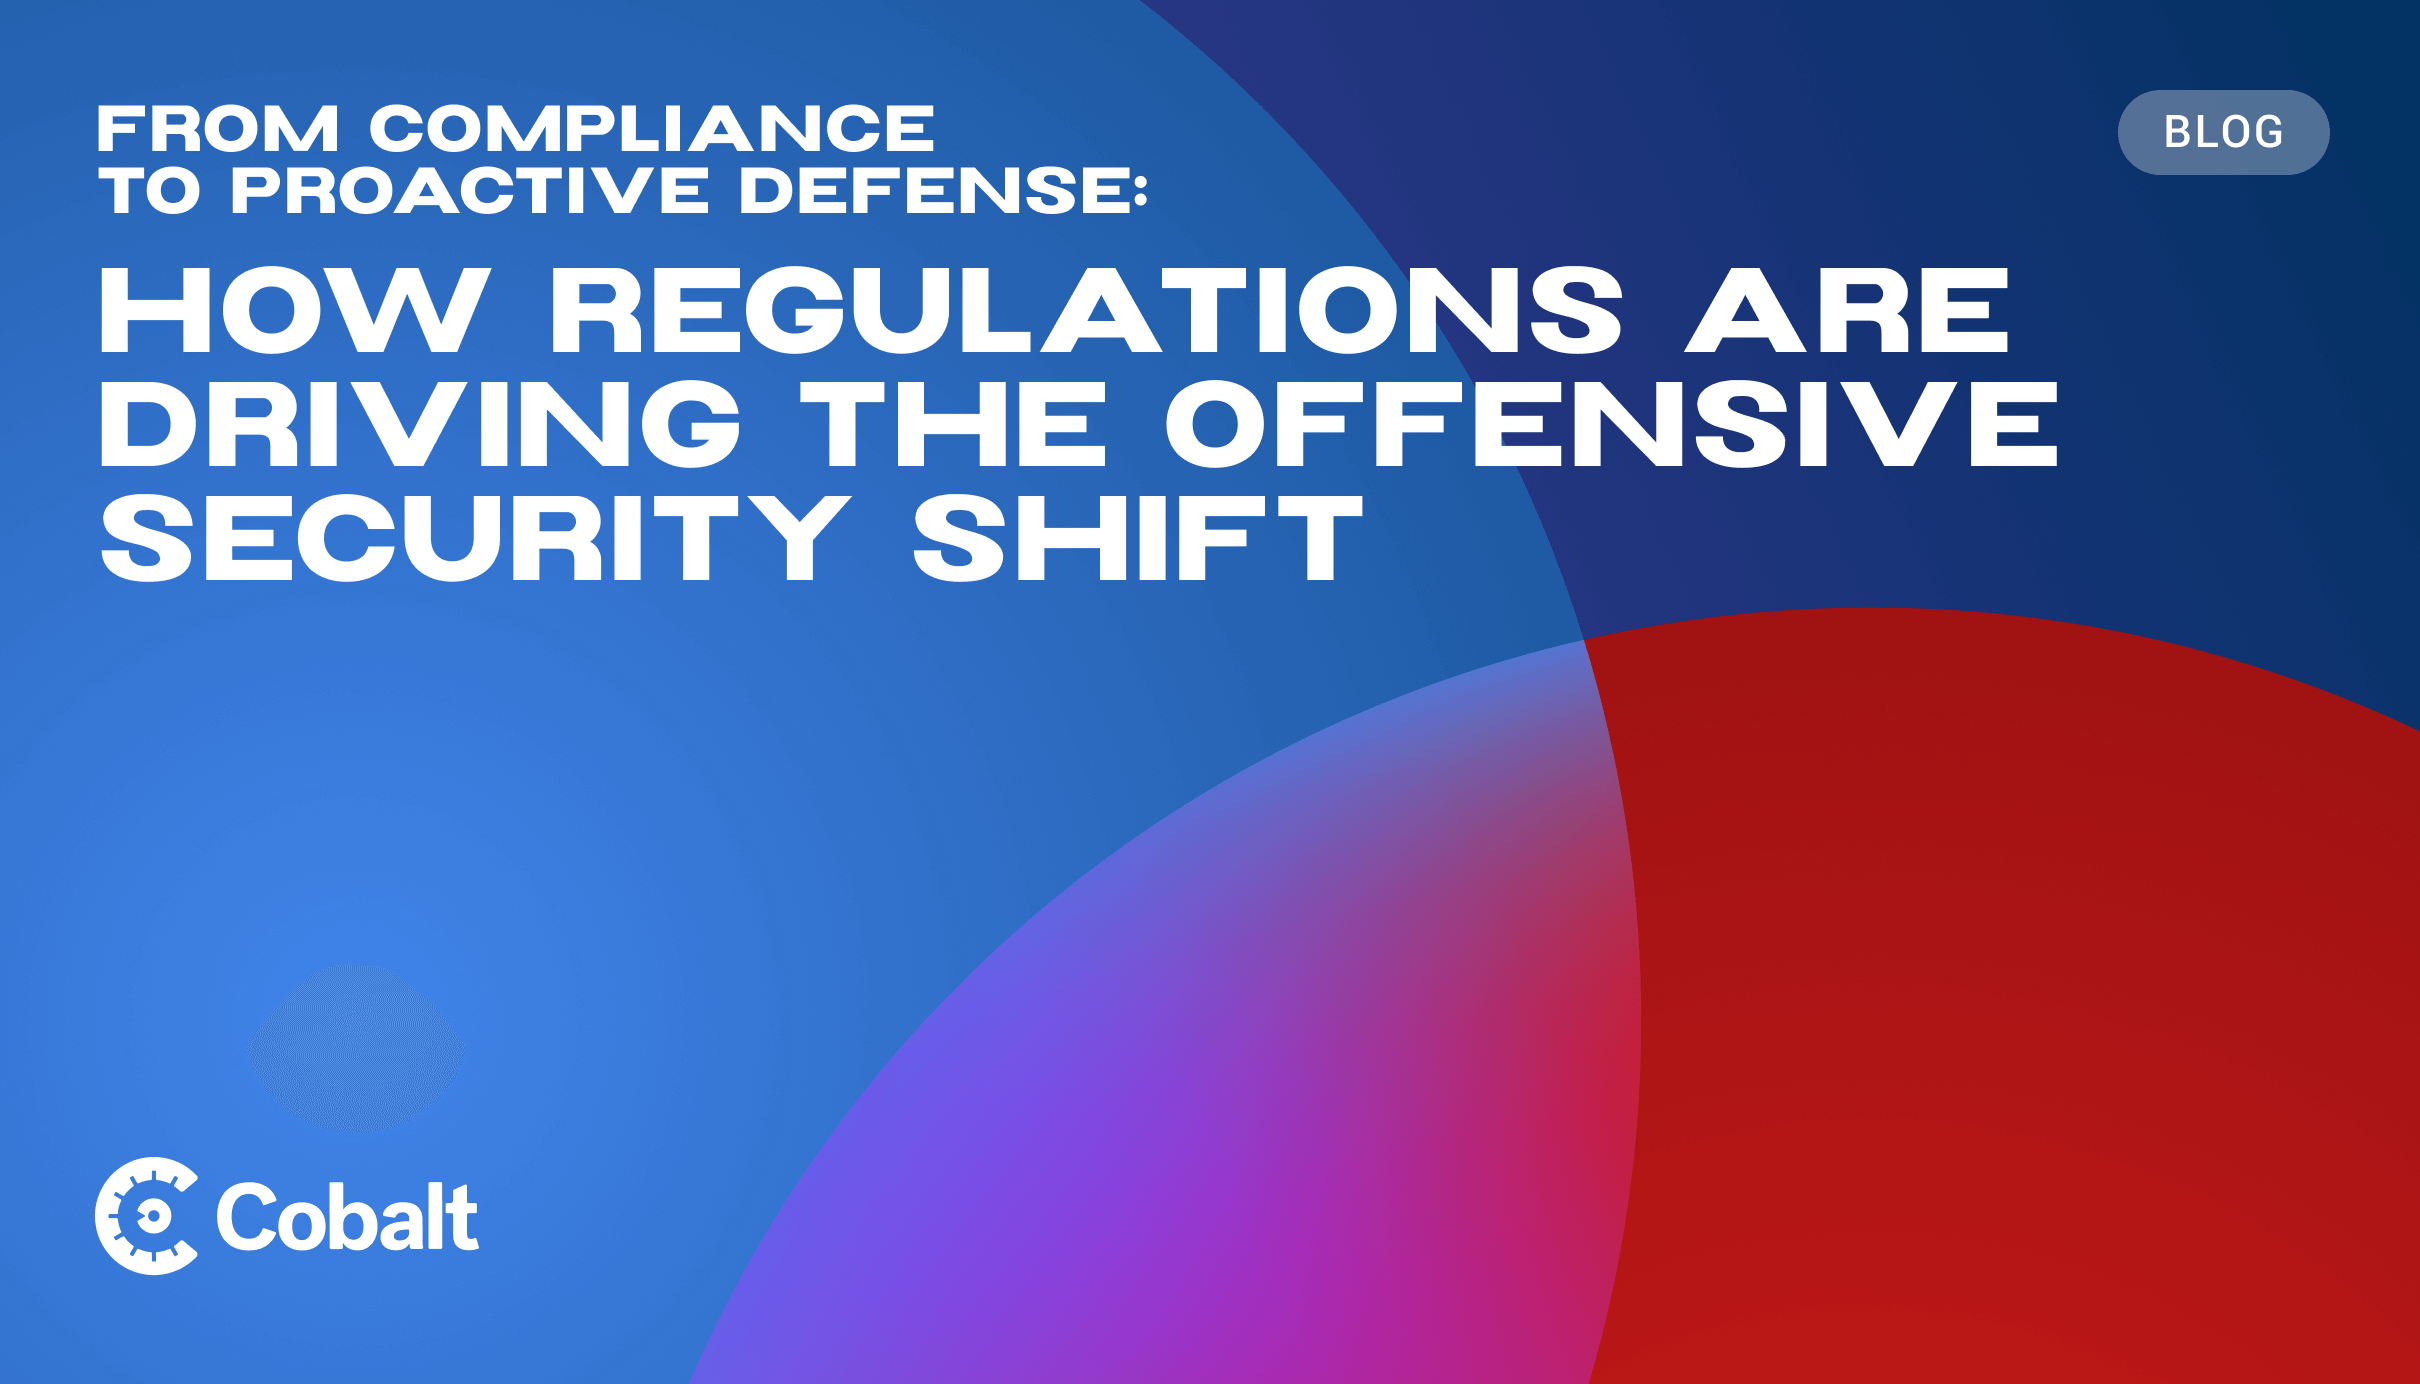 How regulations are driving the offensive security shift cover image